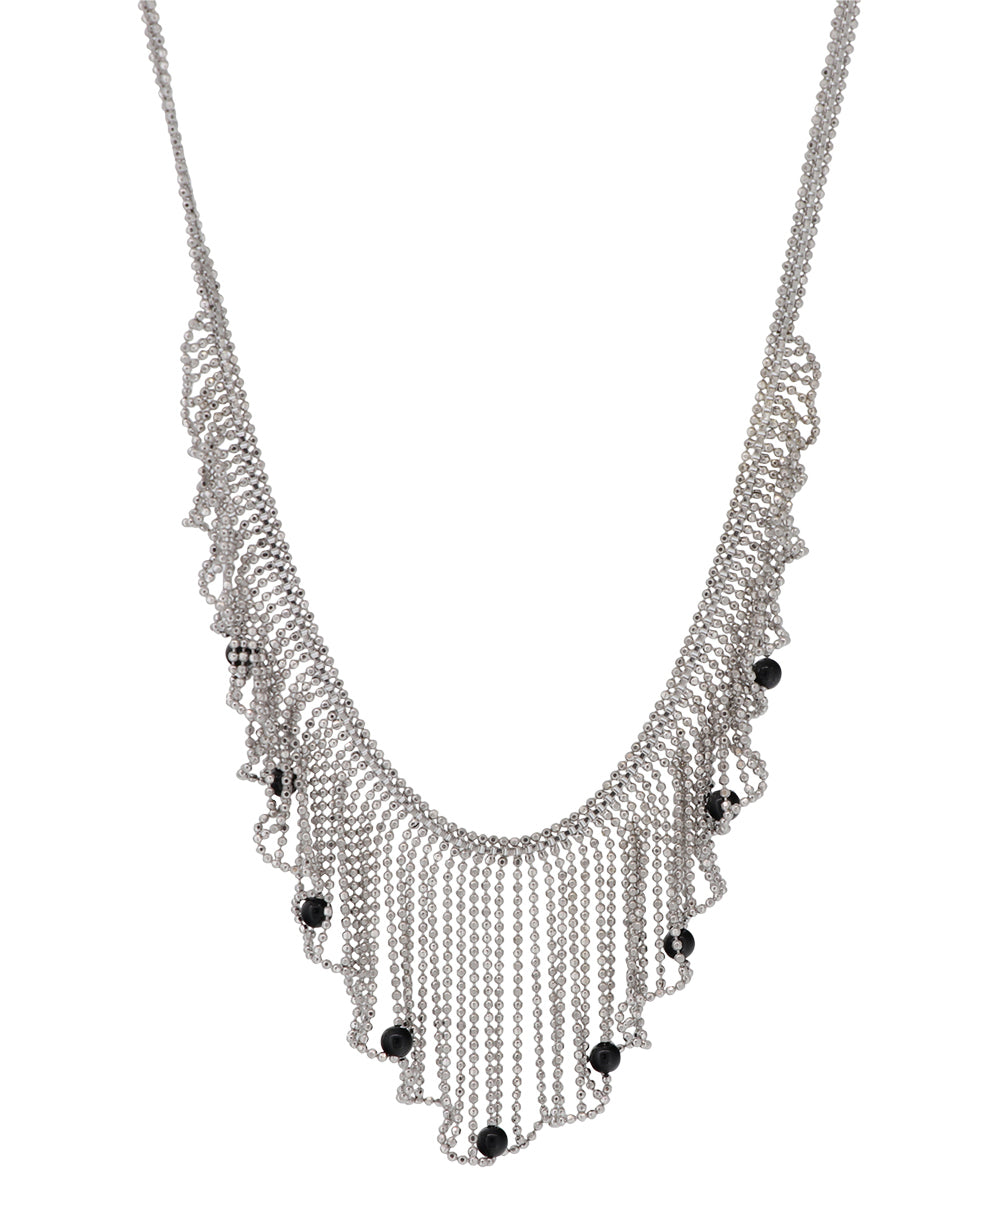 Hill-Tribe silver necklace with rhodium plating and delicate fringe design